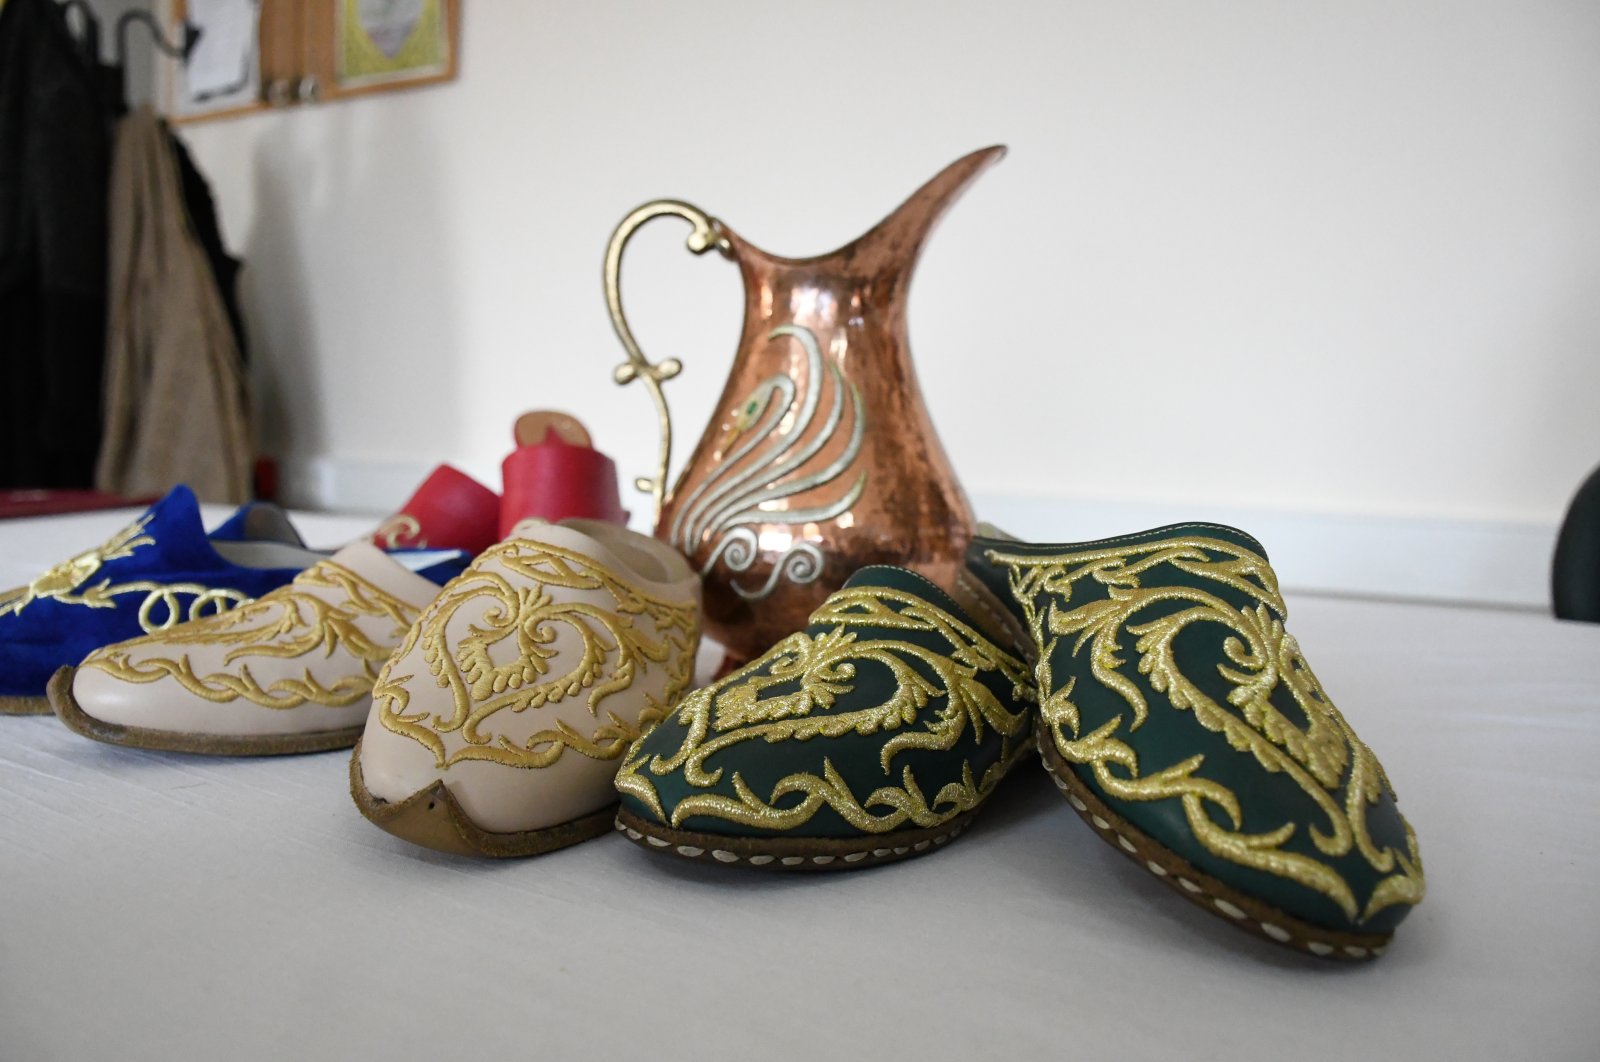 Slippers and a pitcher decorated with sim sırma at Kahramanmaraş Technical Institute, southern Turkey, Jan. 21, 2021. (AA Photo)